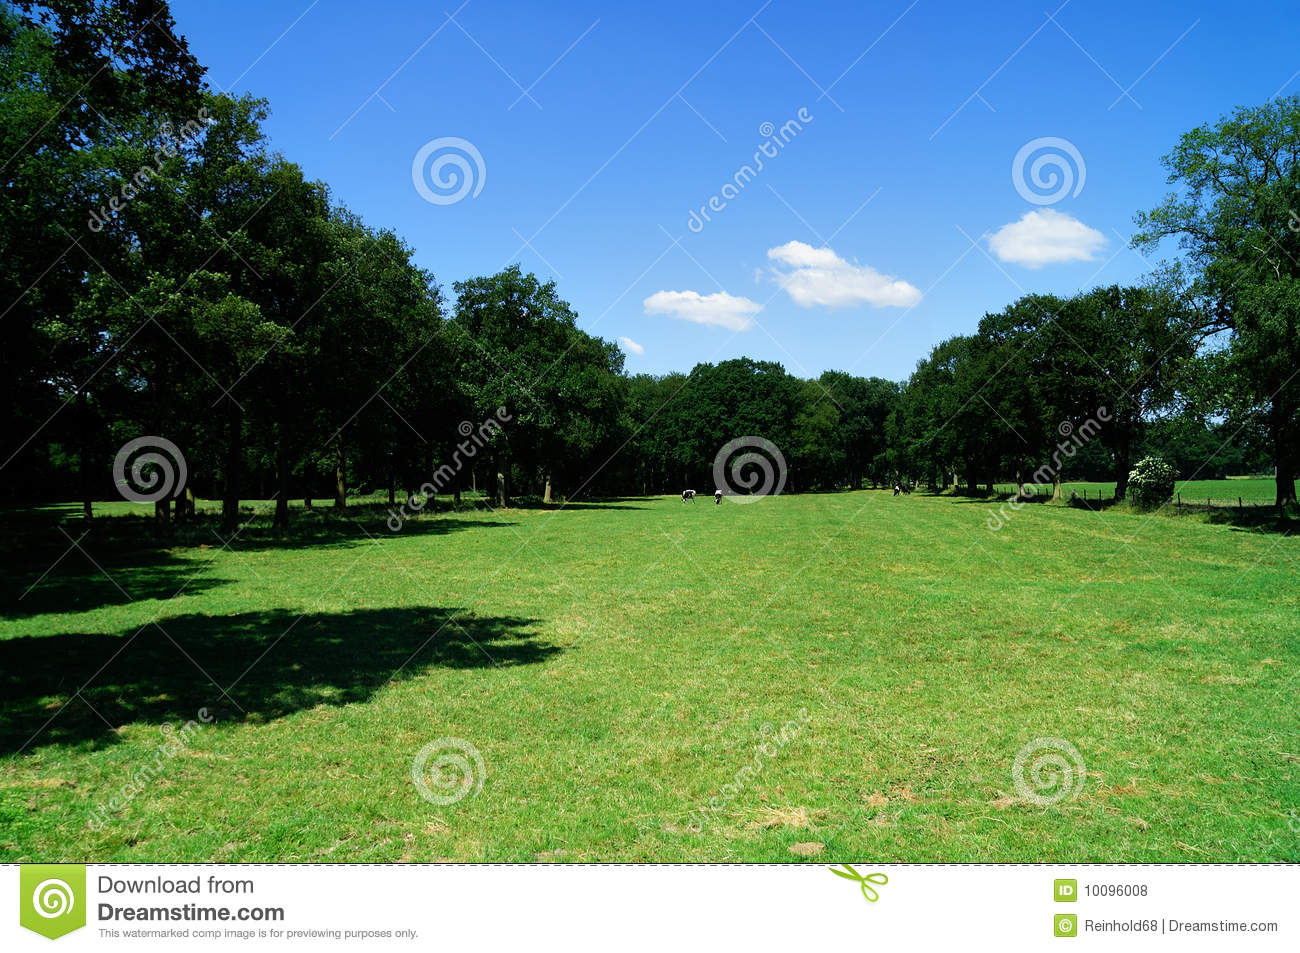 Range Land With Green Meadow Bordered With Trees In Front Of A Blue